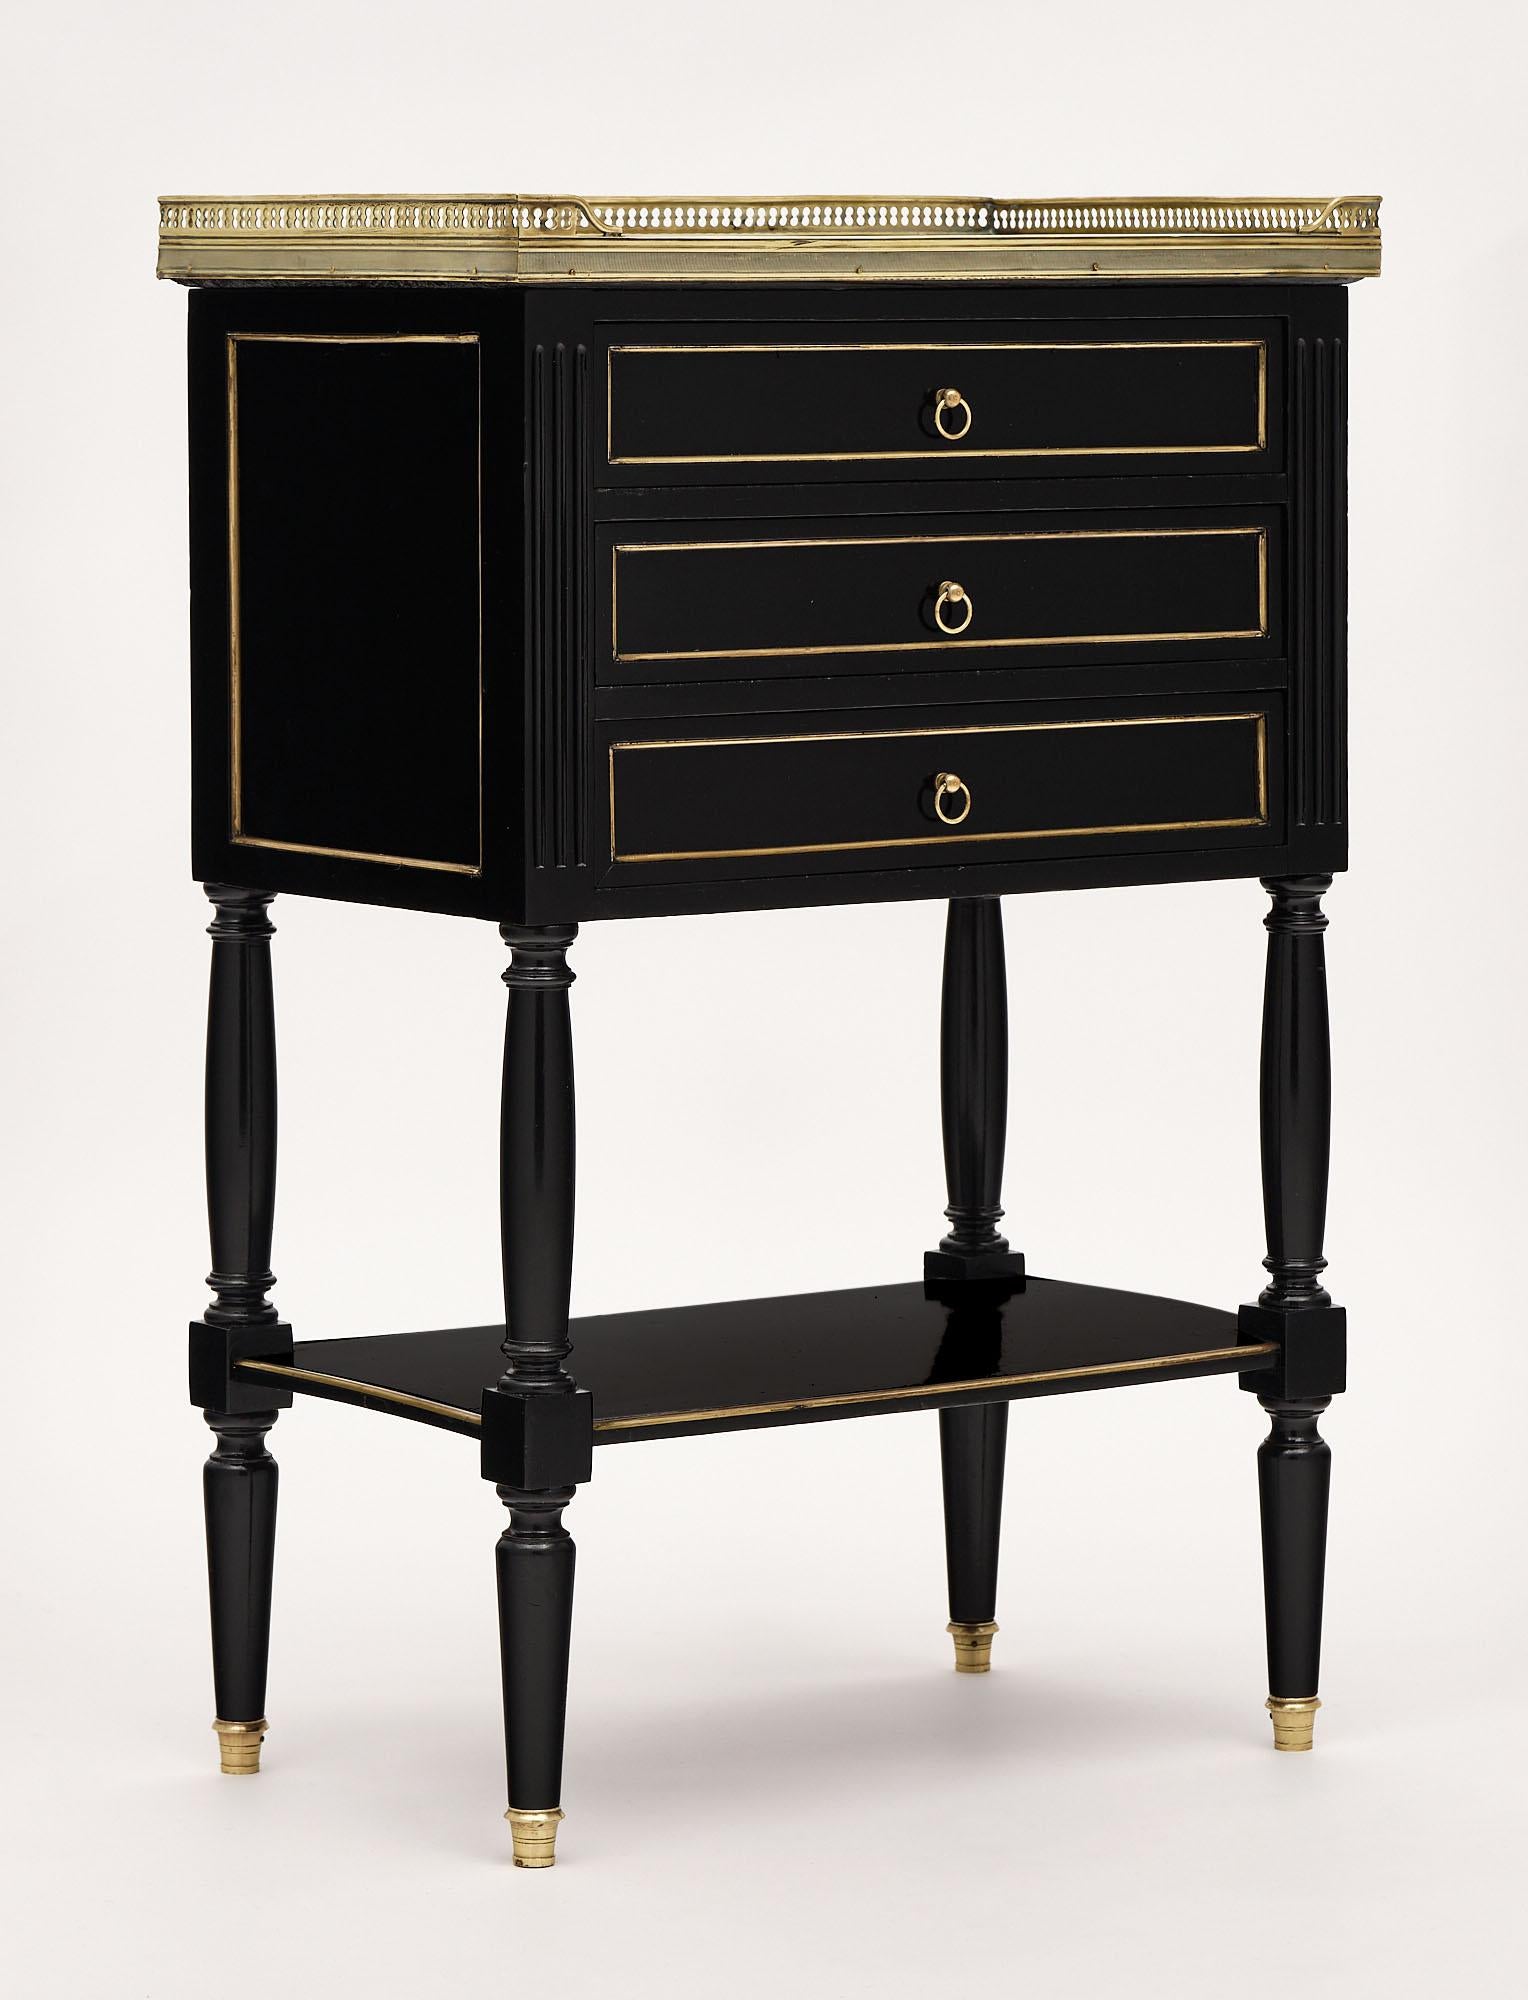 Side table from France in the Louis XVI style made of mahogany and ebonized with a lustrous museum quality French polish. There are three dovetailed drawers above a lower shelf supported by toupees legs. The top is a Carrara marble surrounded by a